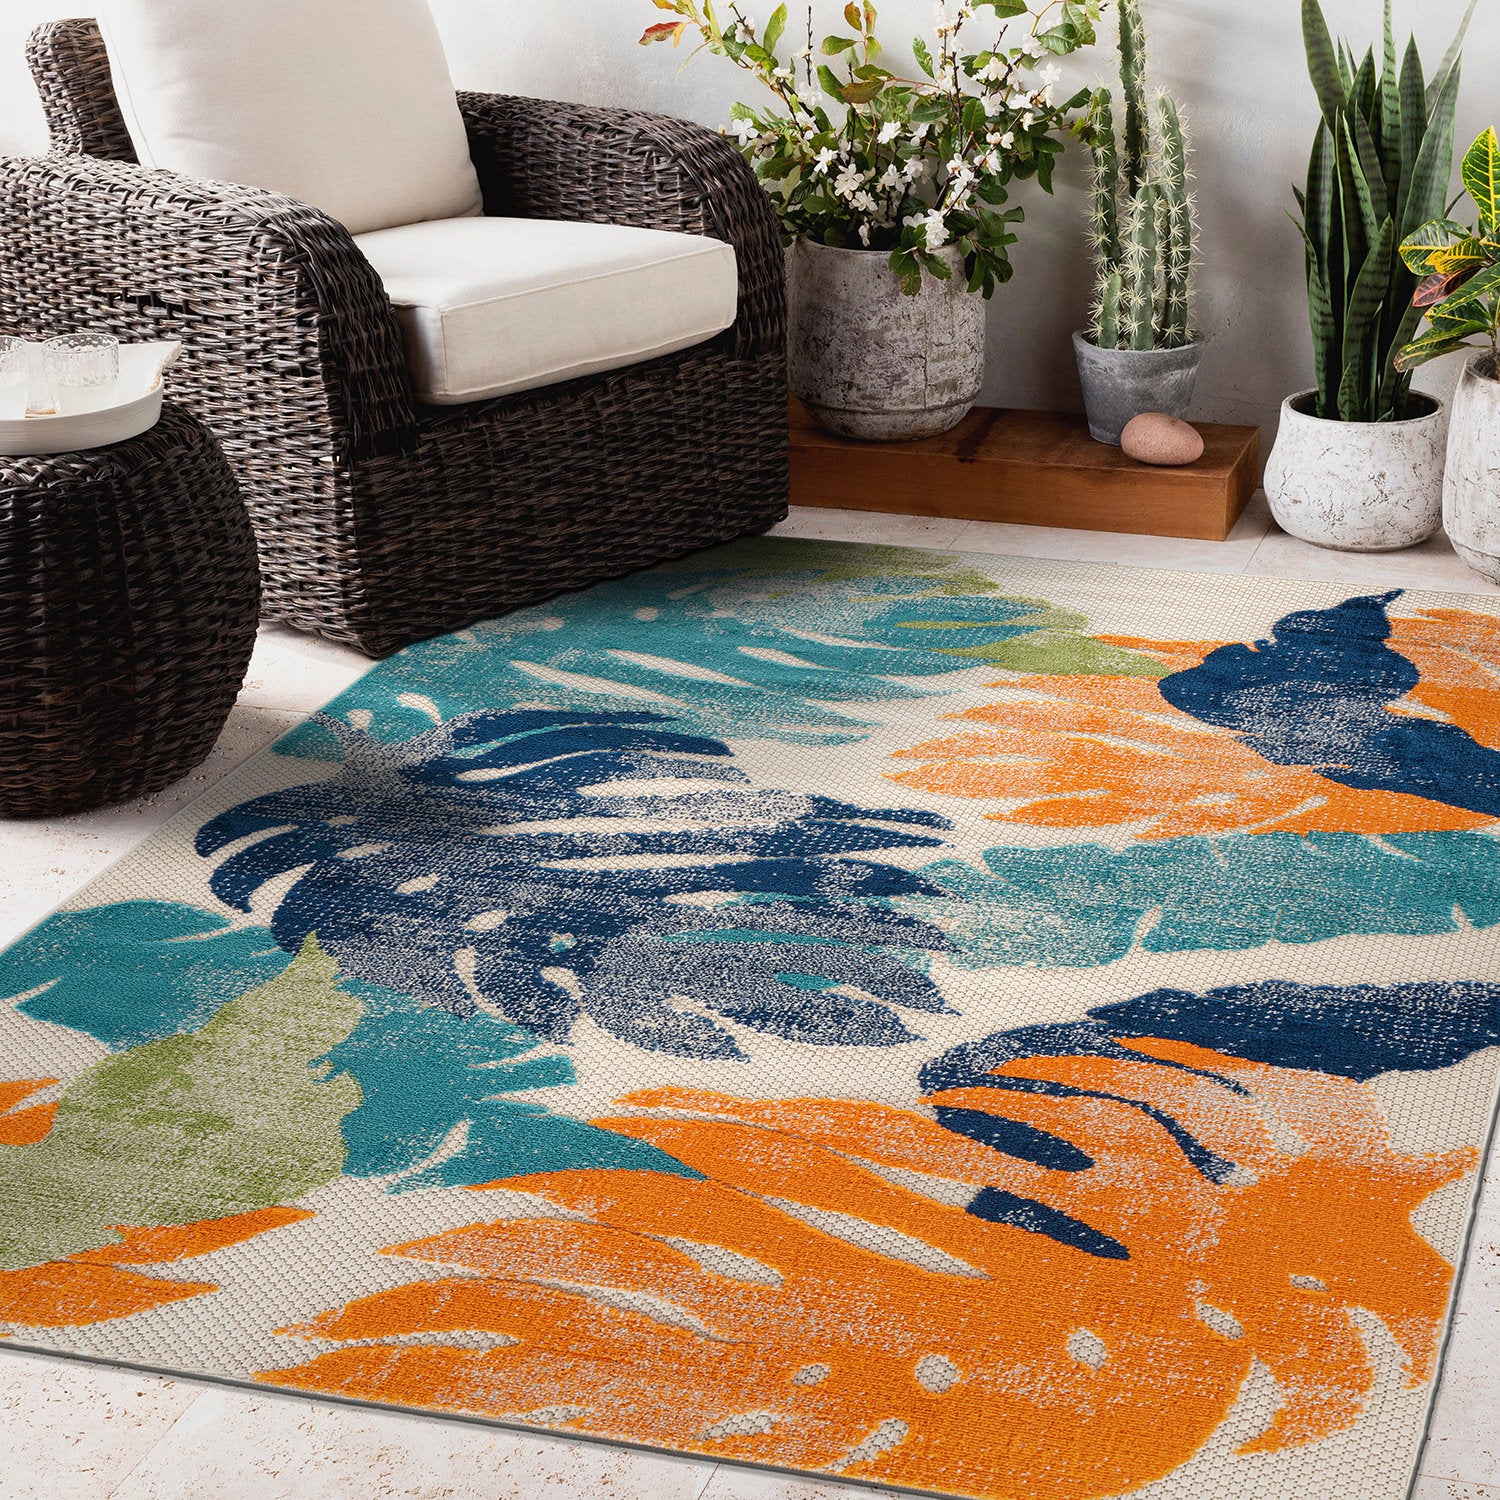 World Rug Gallery Seville Floral Leaves Indoor/Outdoor Area Rug - Multi 7'10 x 10